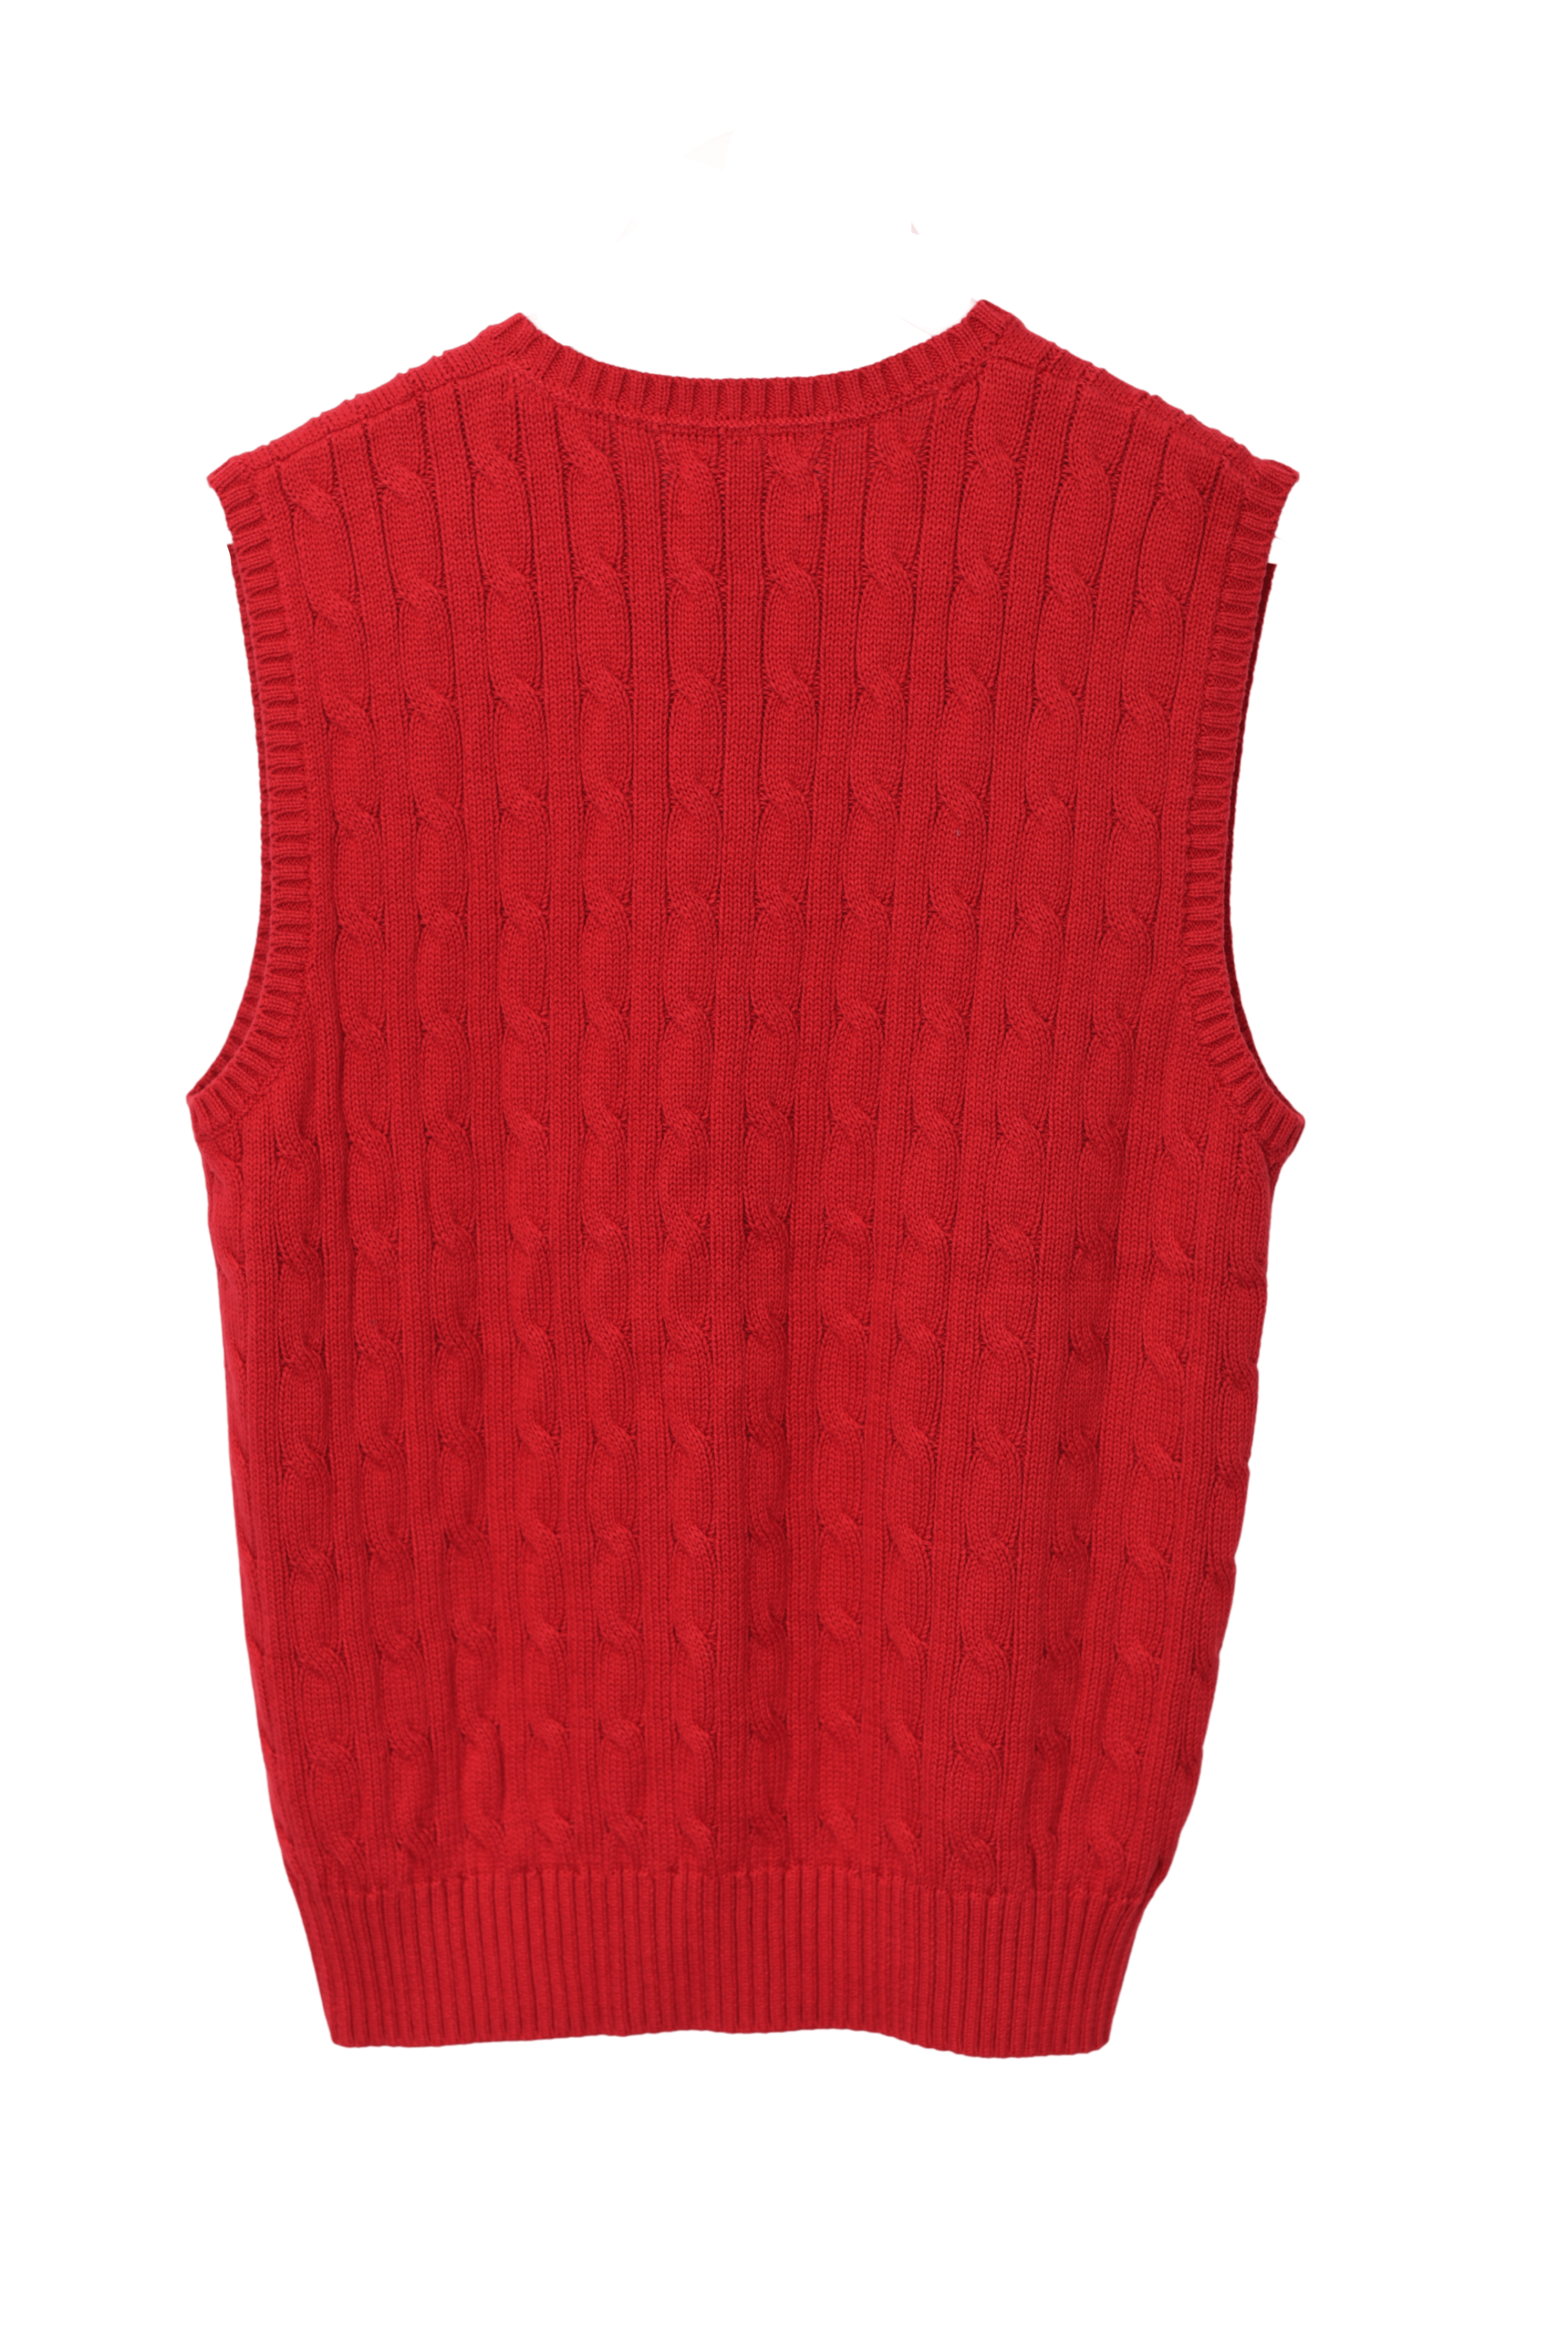 Red Cotton Cable-Knit Sleeveless V-Neck Sweater Vest - InimitableMe